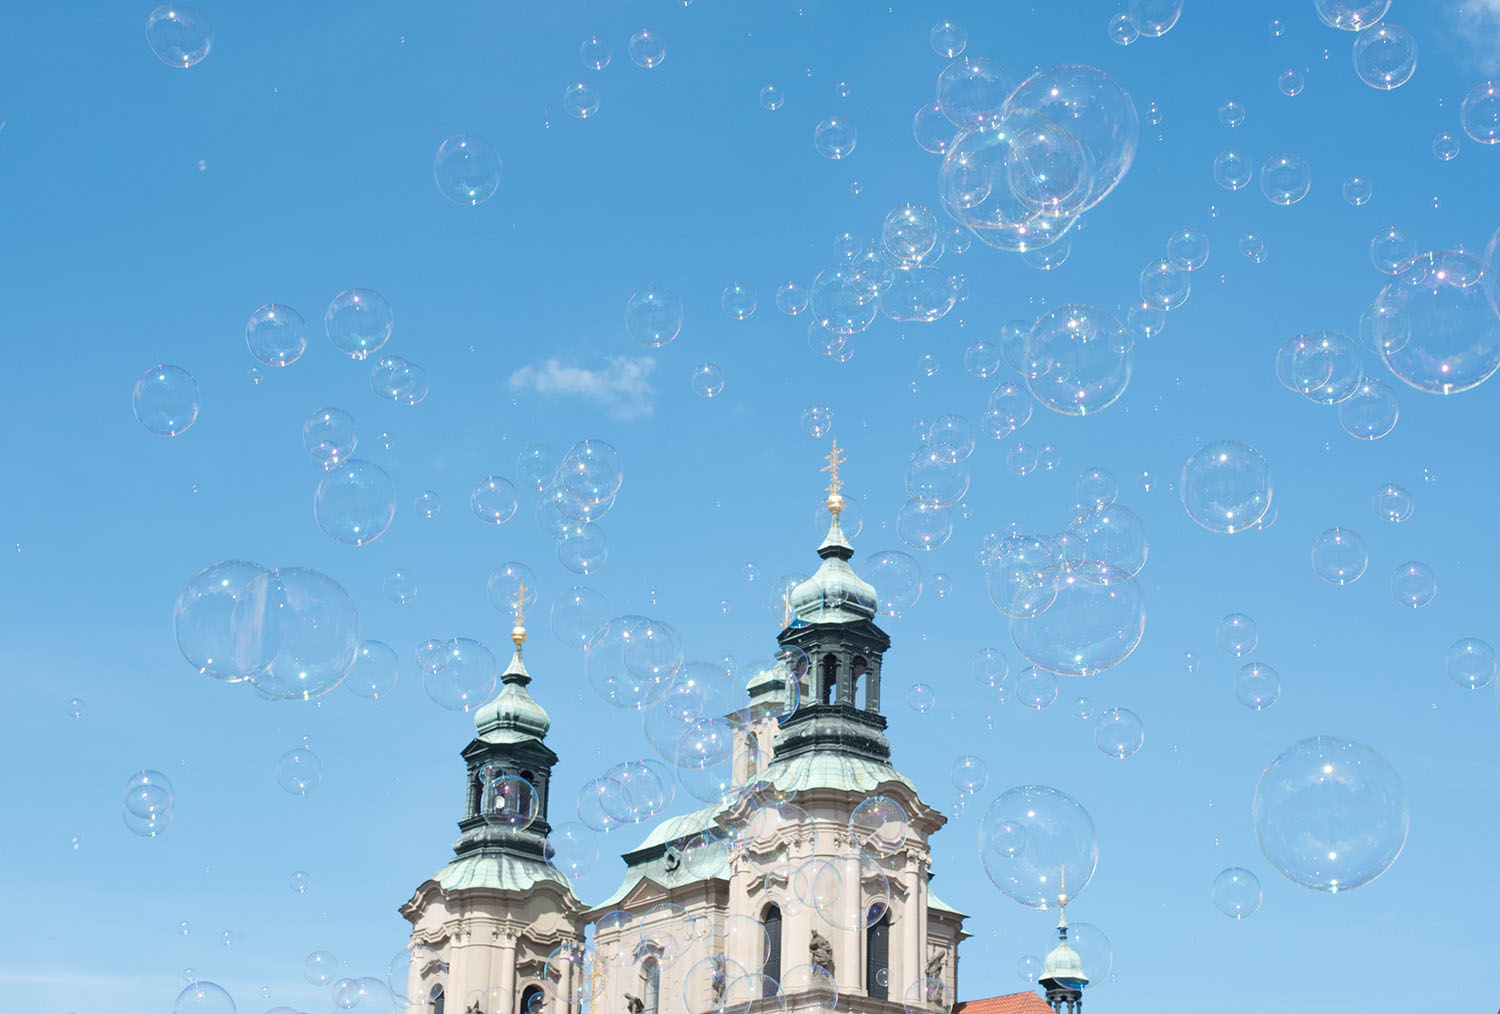 Bubbles in the sky at Old Town Square in Prague, as captured by top Winnipeg travel blogger Cee Fardoe of Coco & Vera